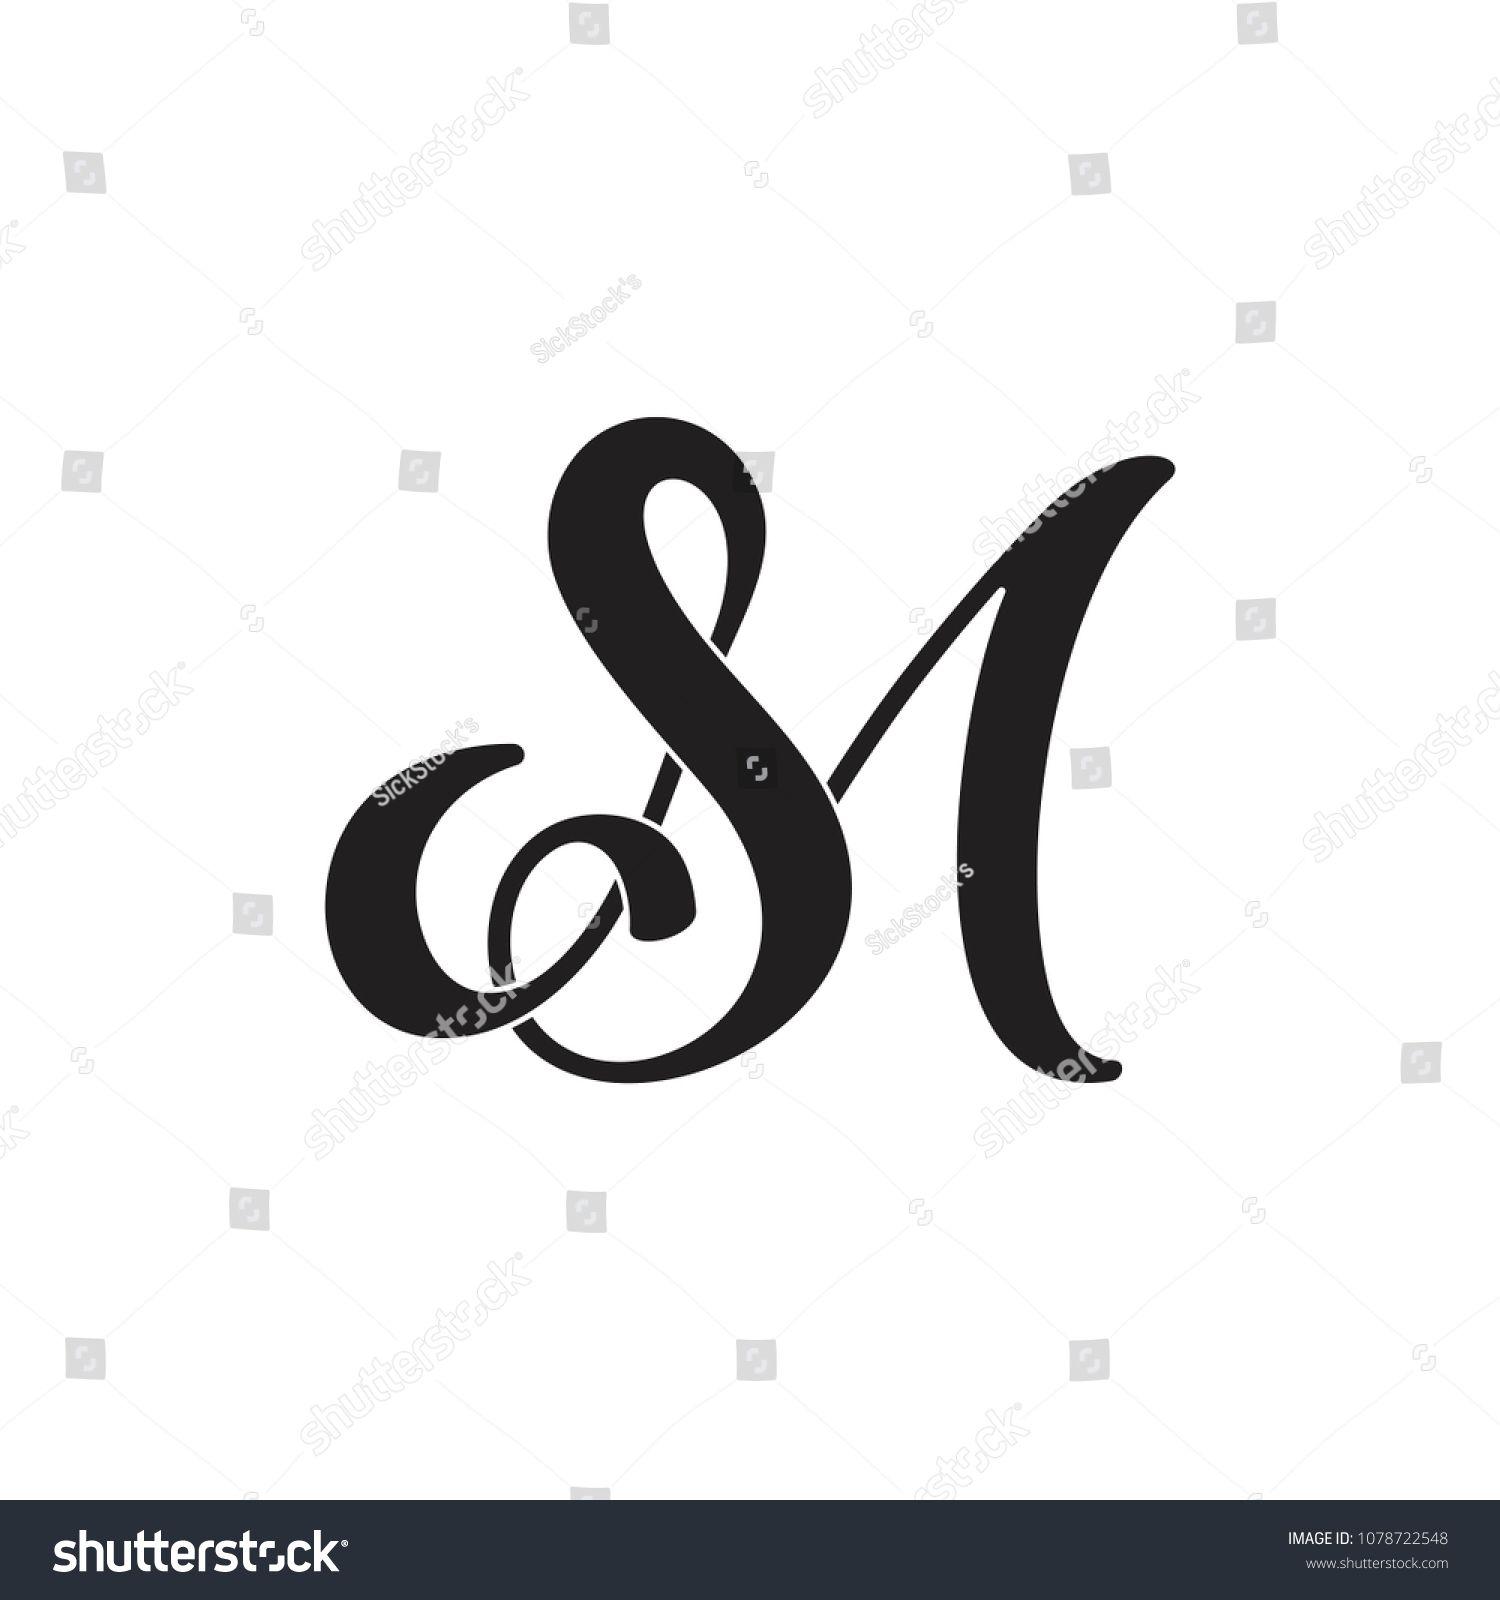 Curves Logo - letters sm curves typography design logo curves#sm#letters#logo